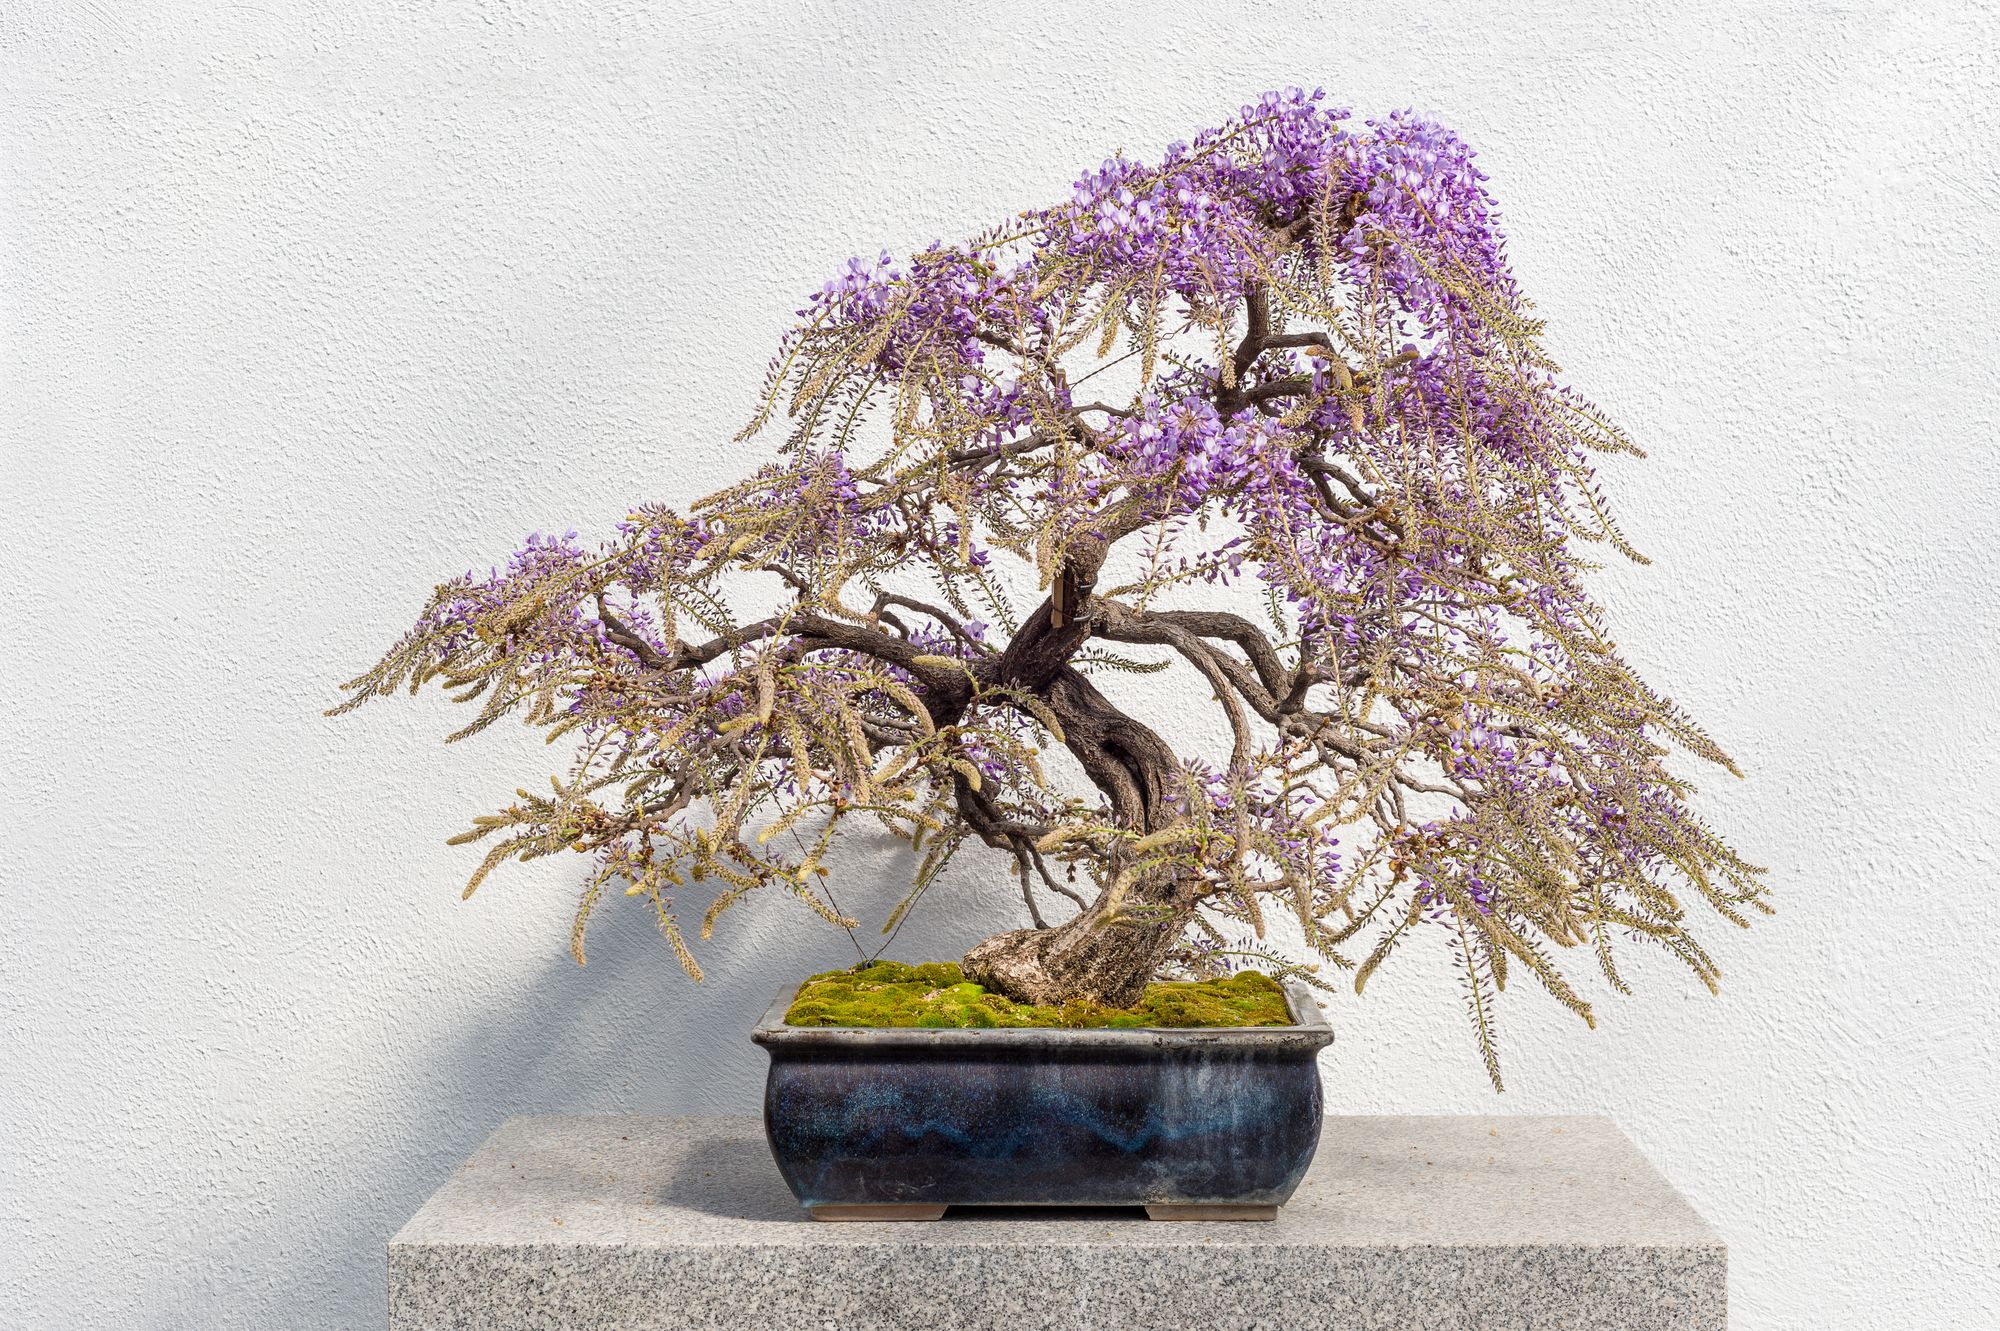 Bent trunk of bonsai tree and several branches with purple like leaves planted in a rectangular pot situated in a solid platform